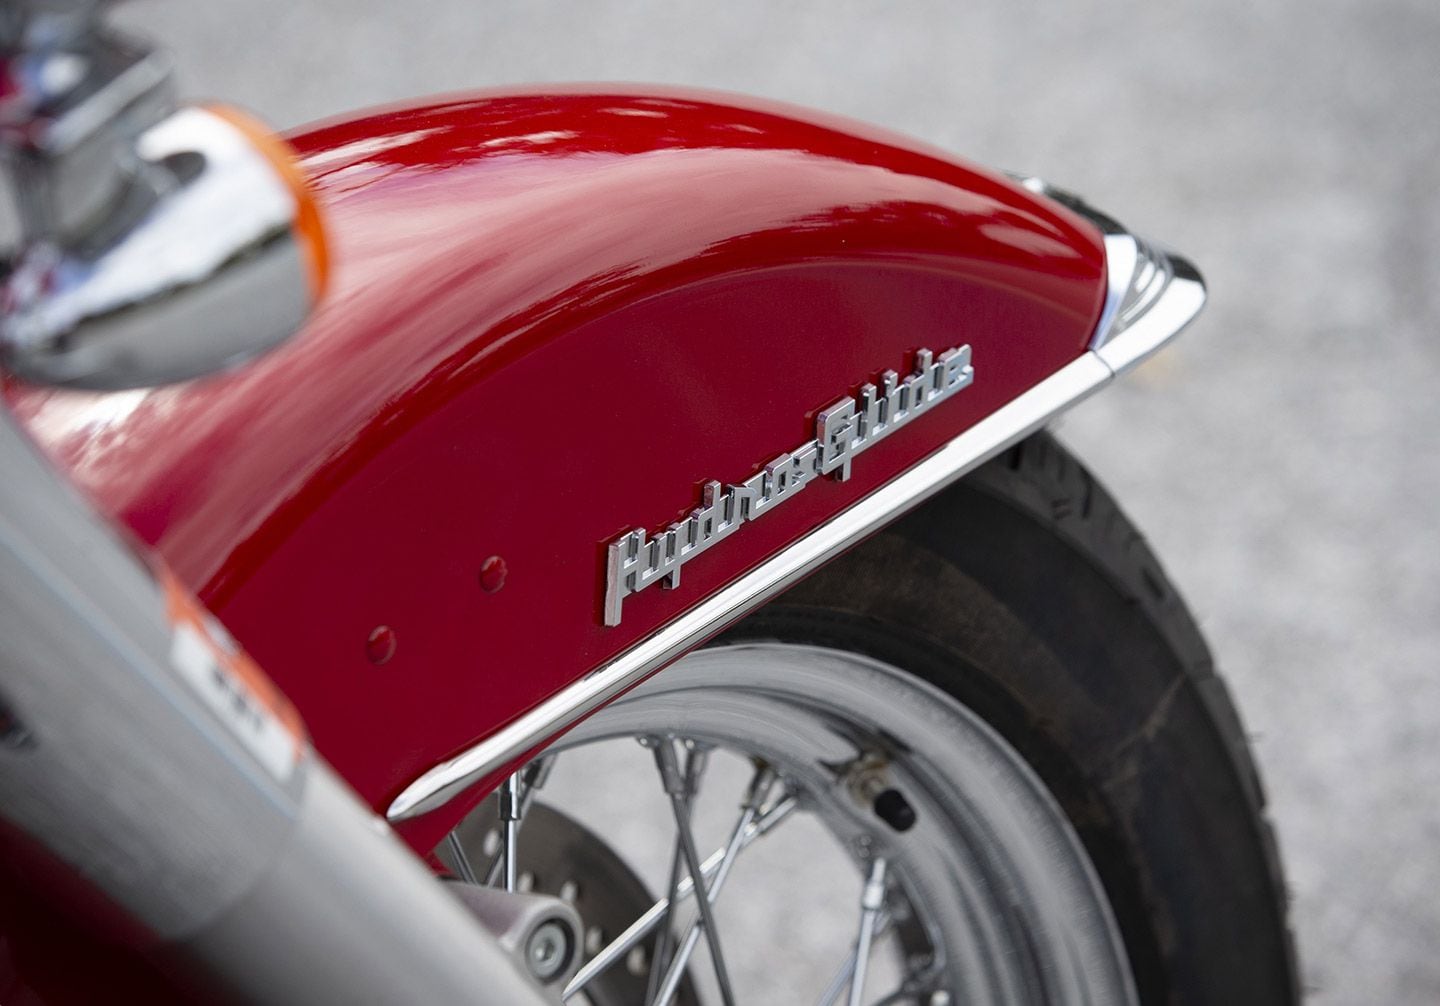 Matching Hydra-Glide badging on chrome-trimmed fender betrays Streamline influences seen in the era.